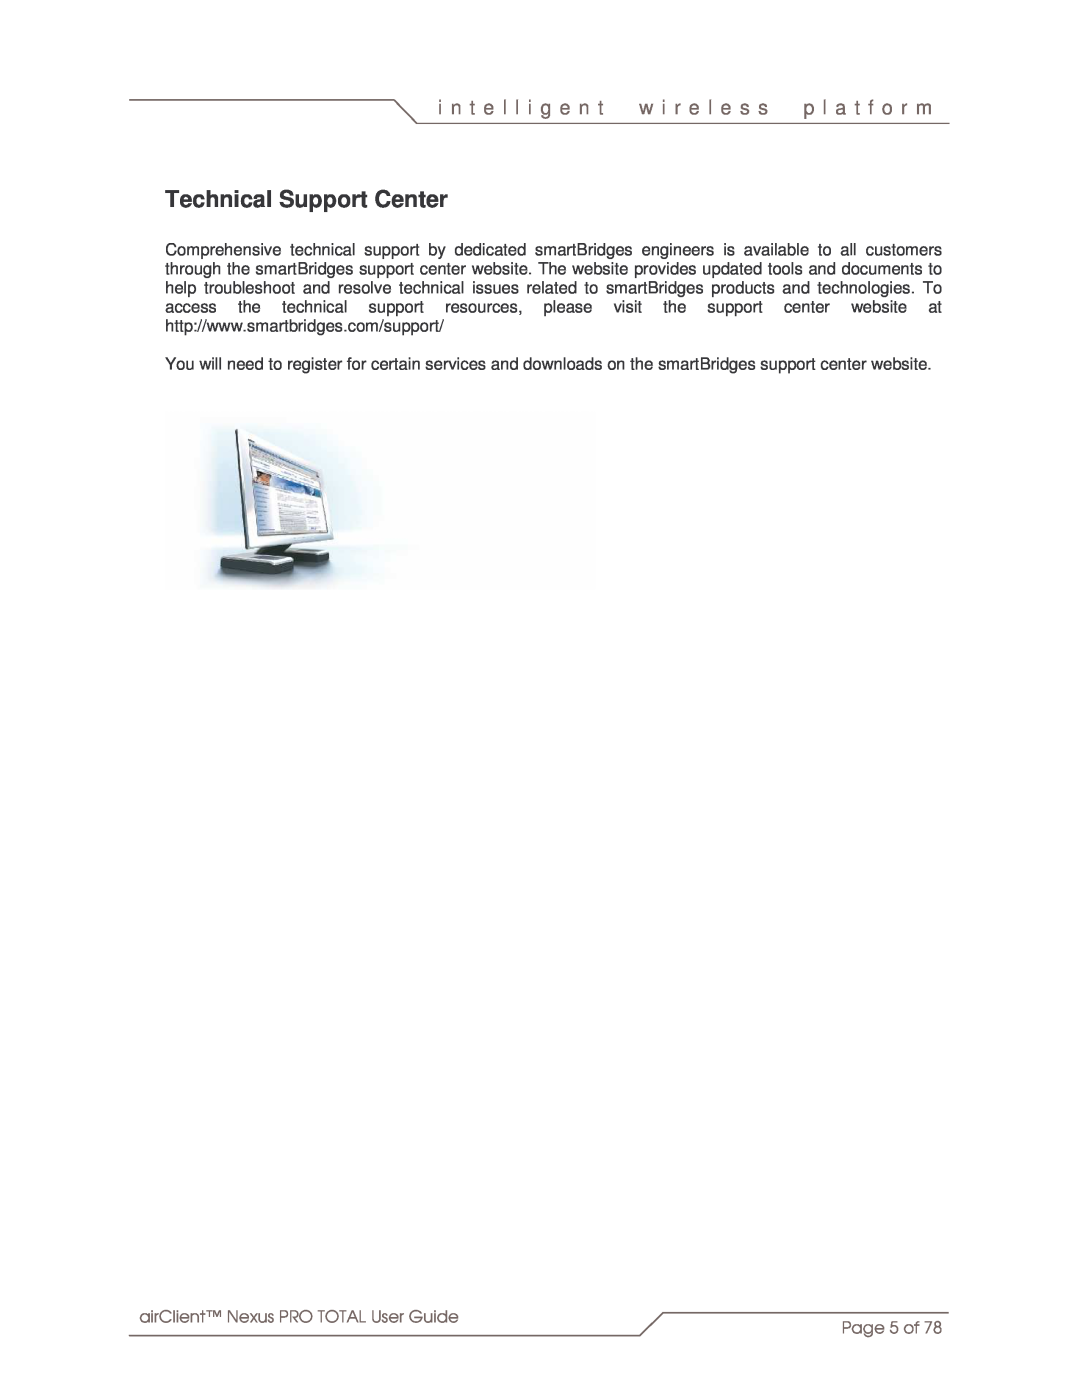 SmartBridges sB3412 manual Technical Support Center, i n t e l l i g e n t, w i r e l e s s, p l a t f o r m, Page 5 of 